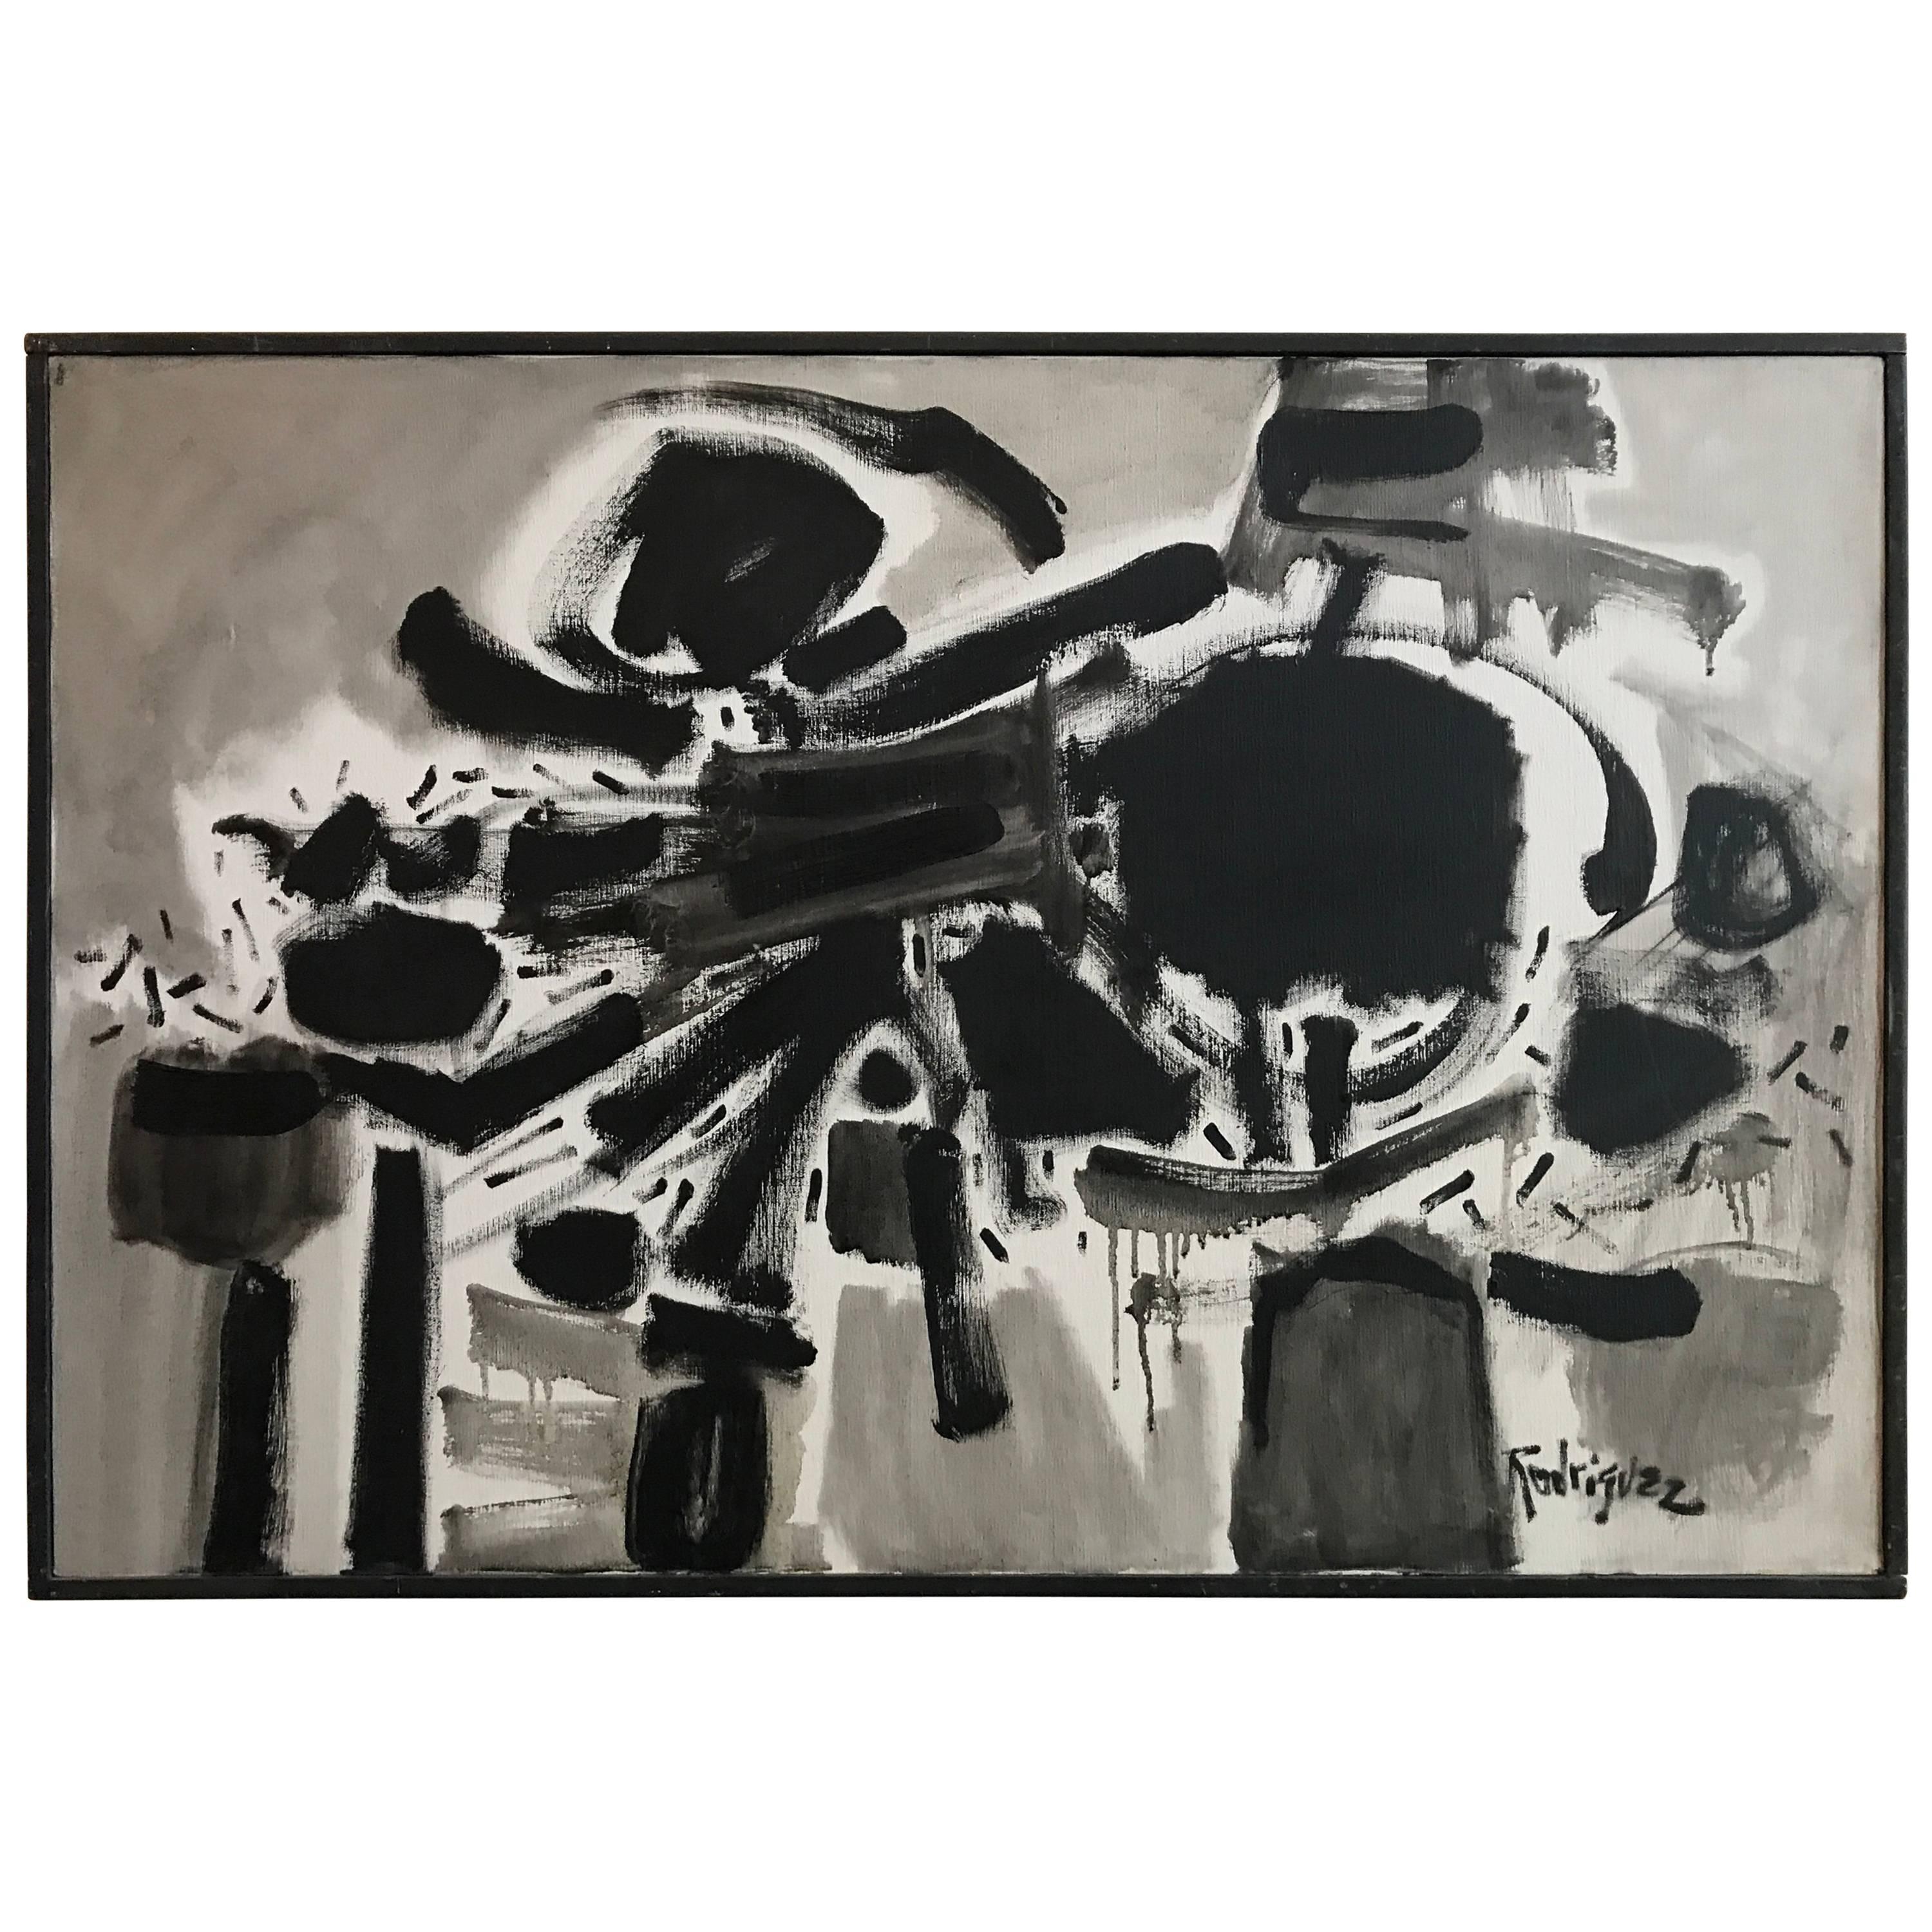 Peter Rodriguez Bay Area Artist Abstract Painting "Dia Negro", 1960 For Sale